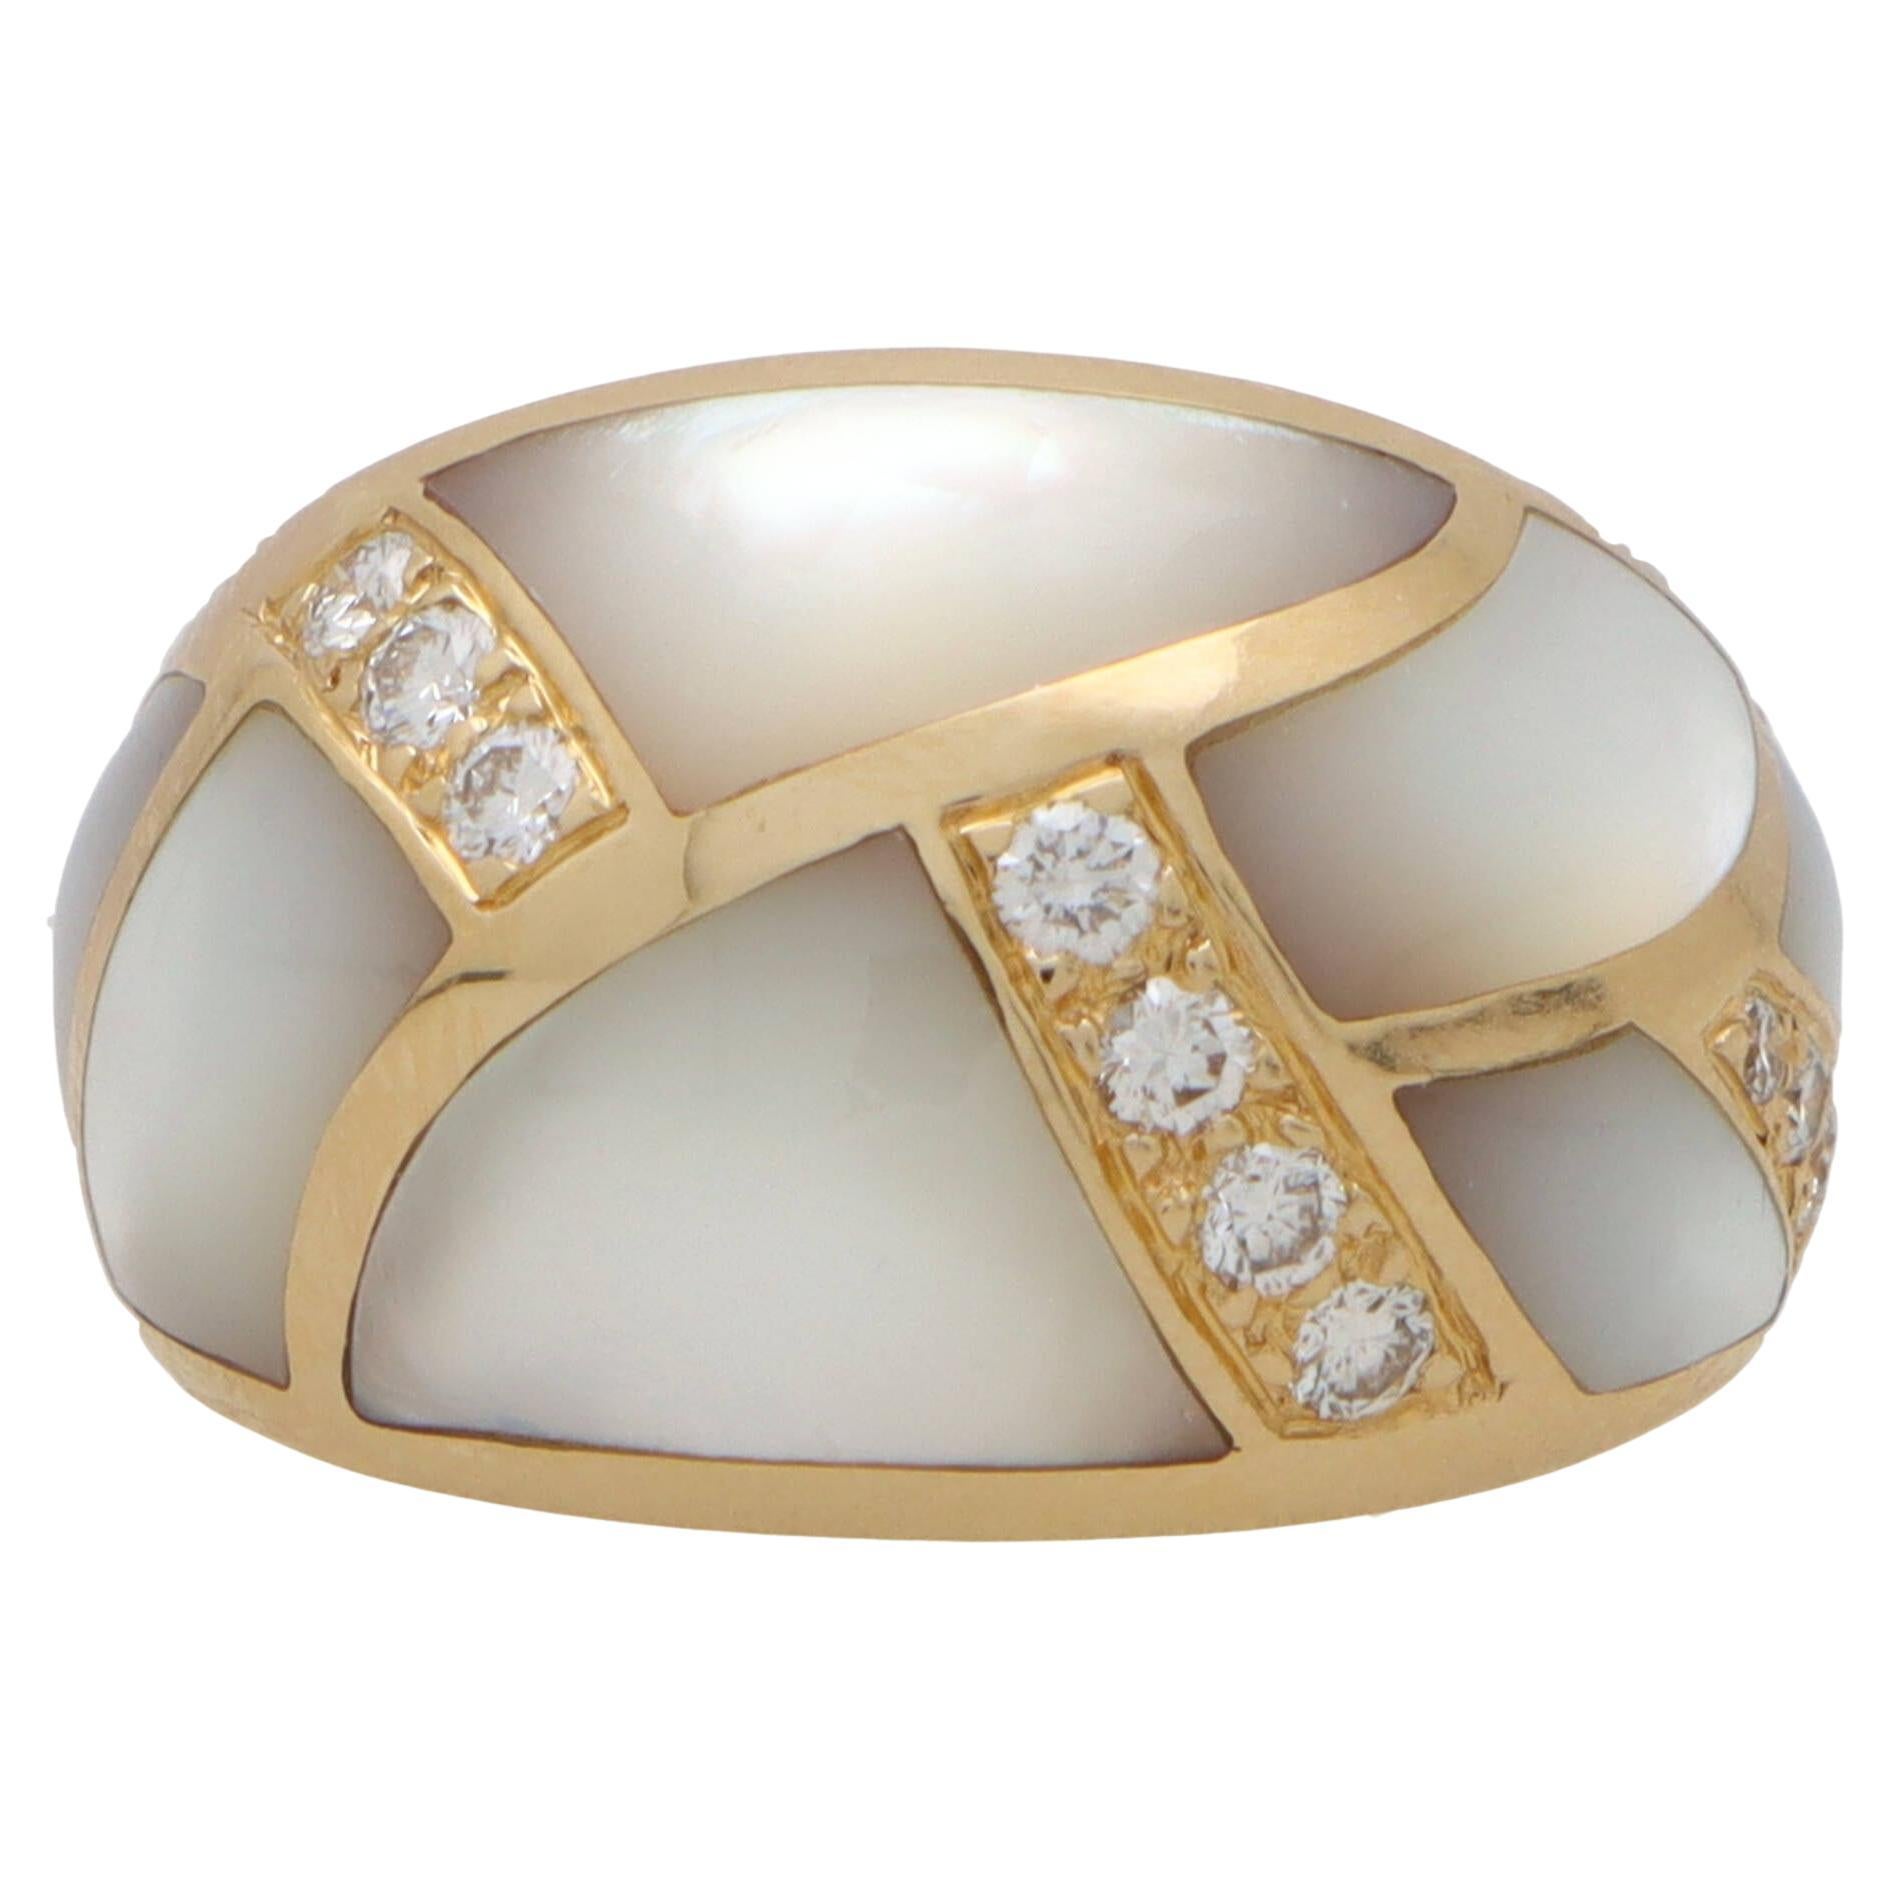  Vintage Mother of Pearl and Diamond Bombe Ring in 14k Yellow Gold For Sale